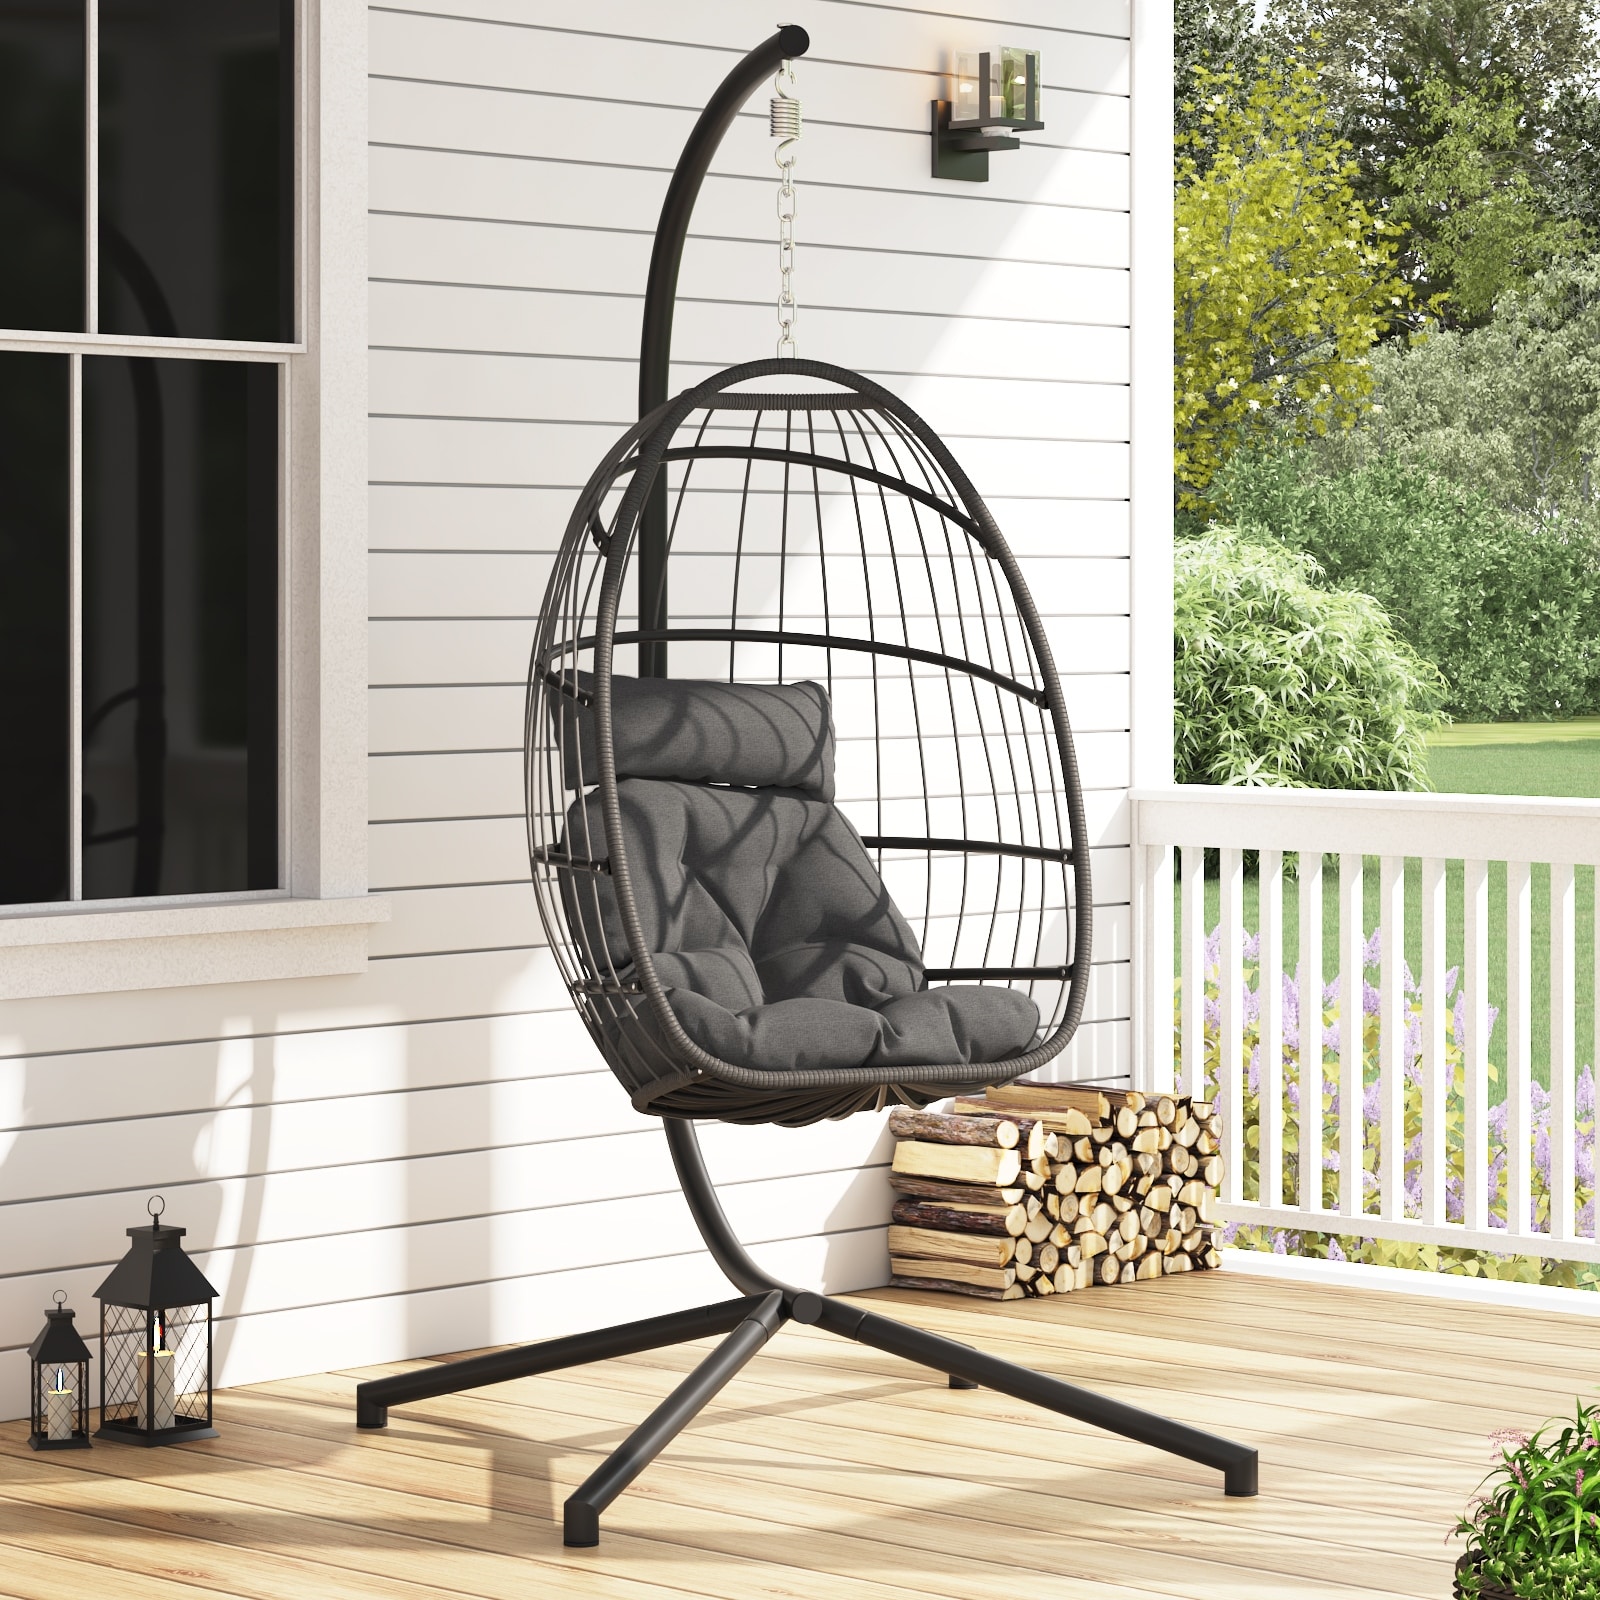 https://ak1.ostkcdn.com/images/products/is/images/direct/c483436652800749873dfb91e539c85331fe30ff/Corvus-Outdoor-Wicker-Egg-Swing-Hanging-Basket-Chair-with-Cushion.jpg